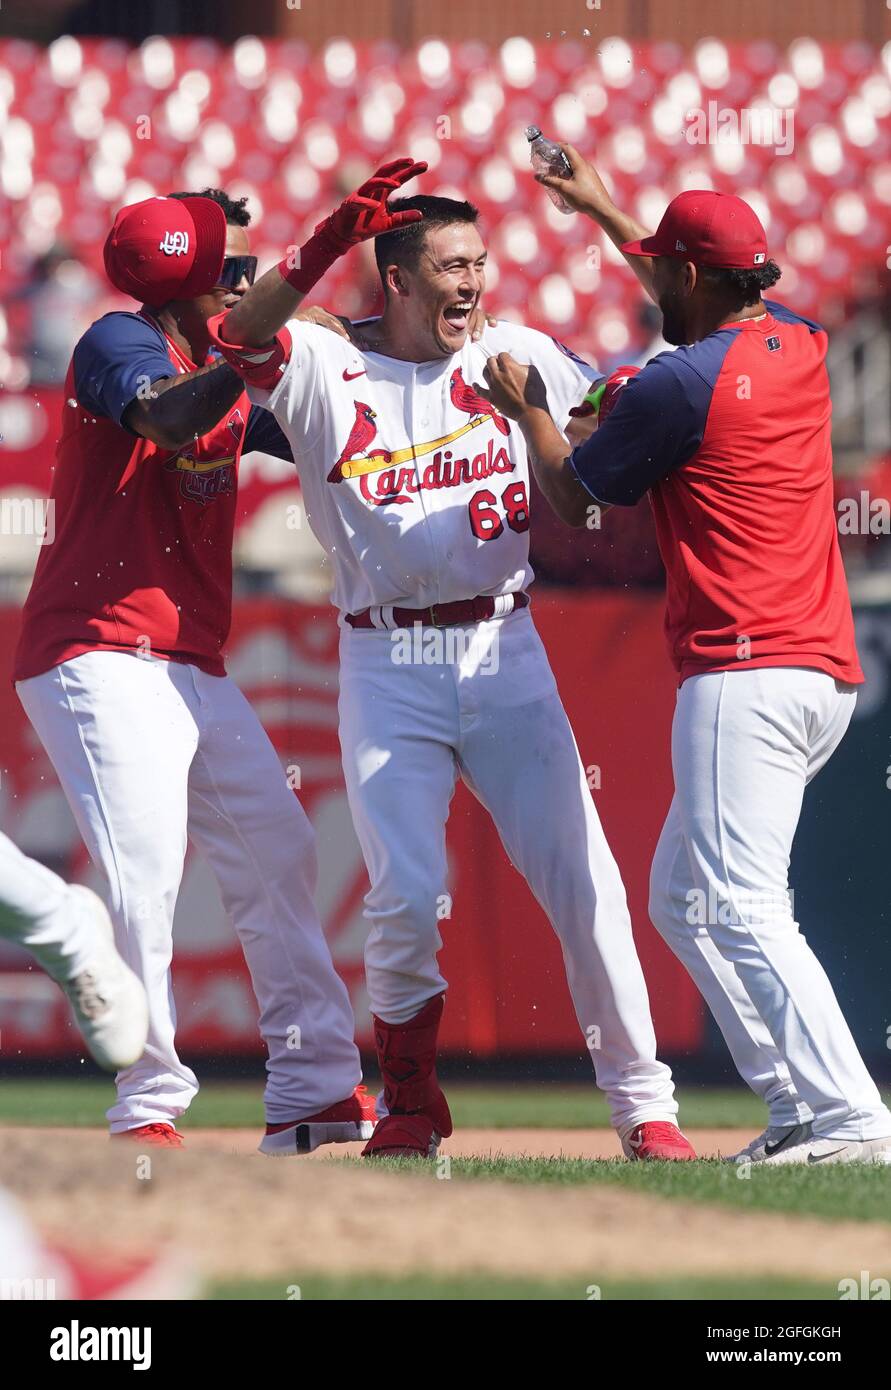 St. Louis, United States. 25th Aug, 2021. St. Louis Cardinals Lars Nootbaar  celebrates with teammates after hitting a game winning single with bases  loaded in the tenth inning against the Detroit Tigers